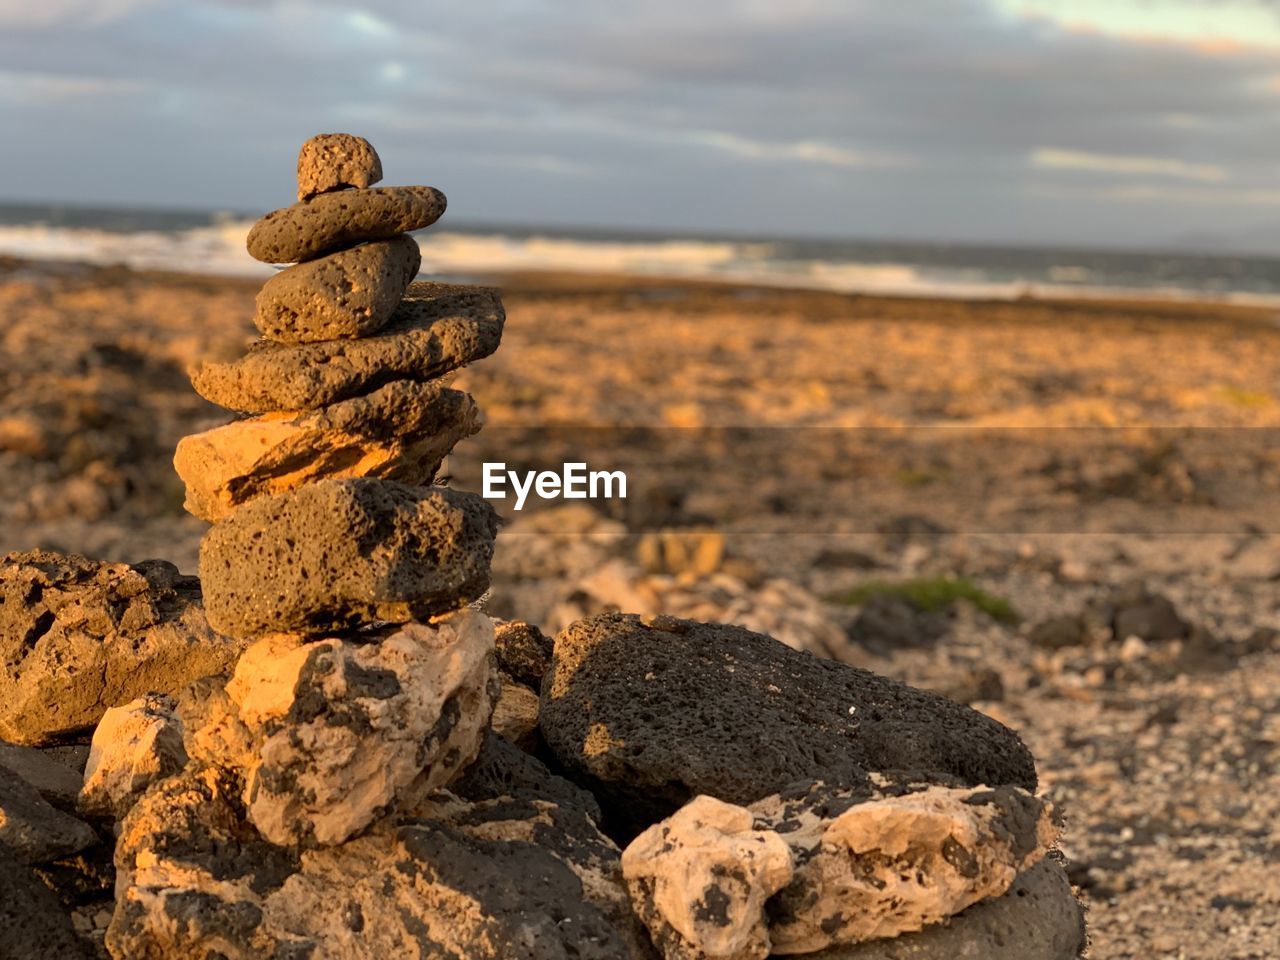 CLOSE-UP OF STACK OF STONES ON BEACH